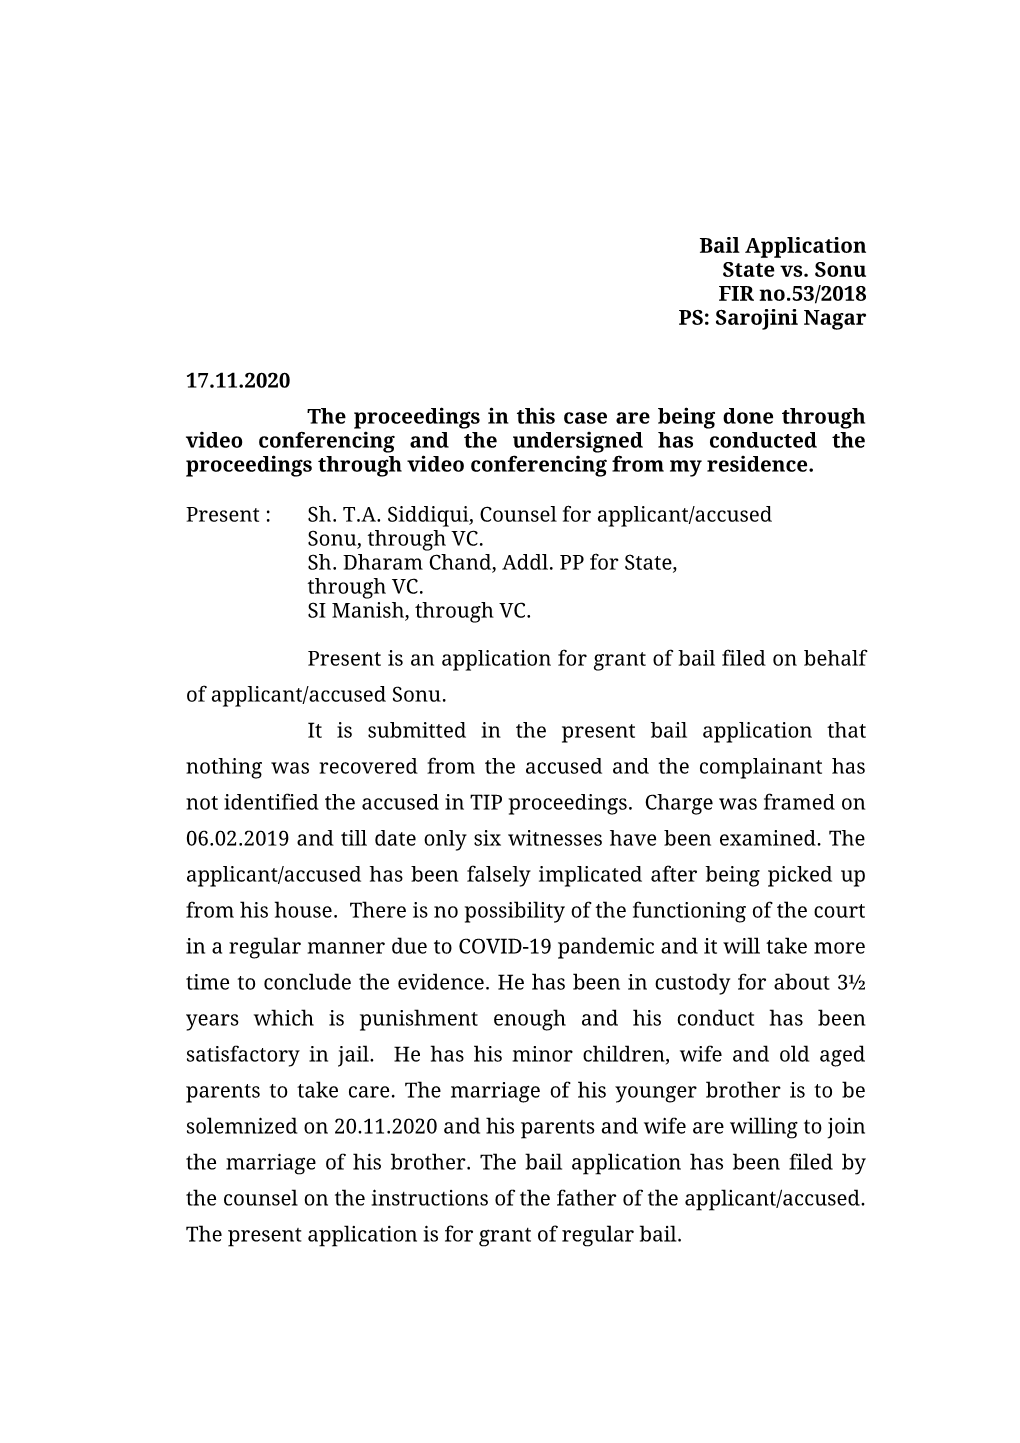 Bail Application State Vs. Sonu FIR No.53/2018 PS: Sarojini Nagar 17.11.2020 the Proceedings in This Case Are Being Done Through